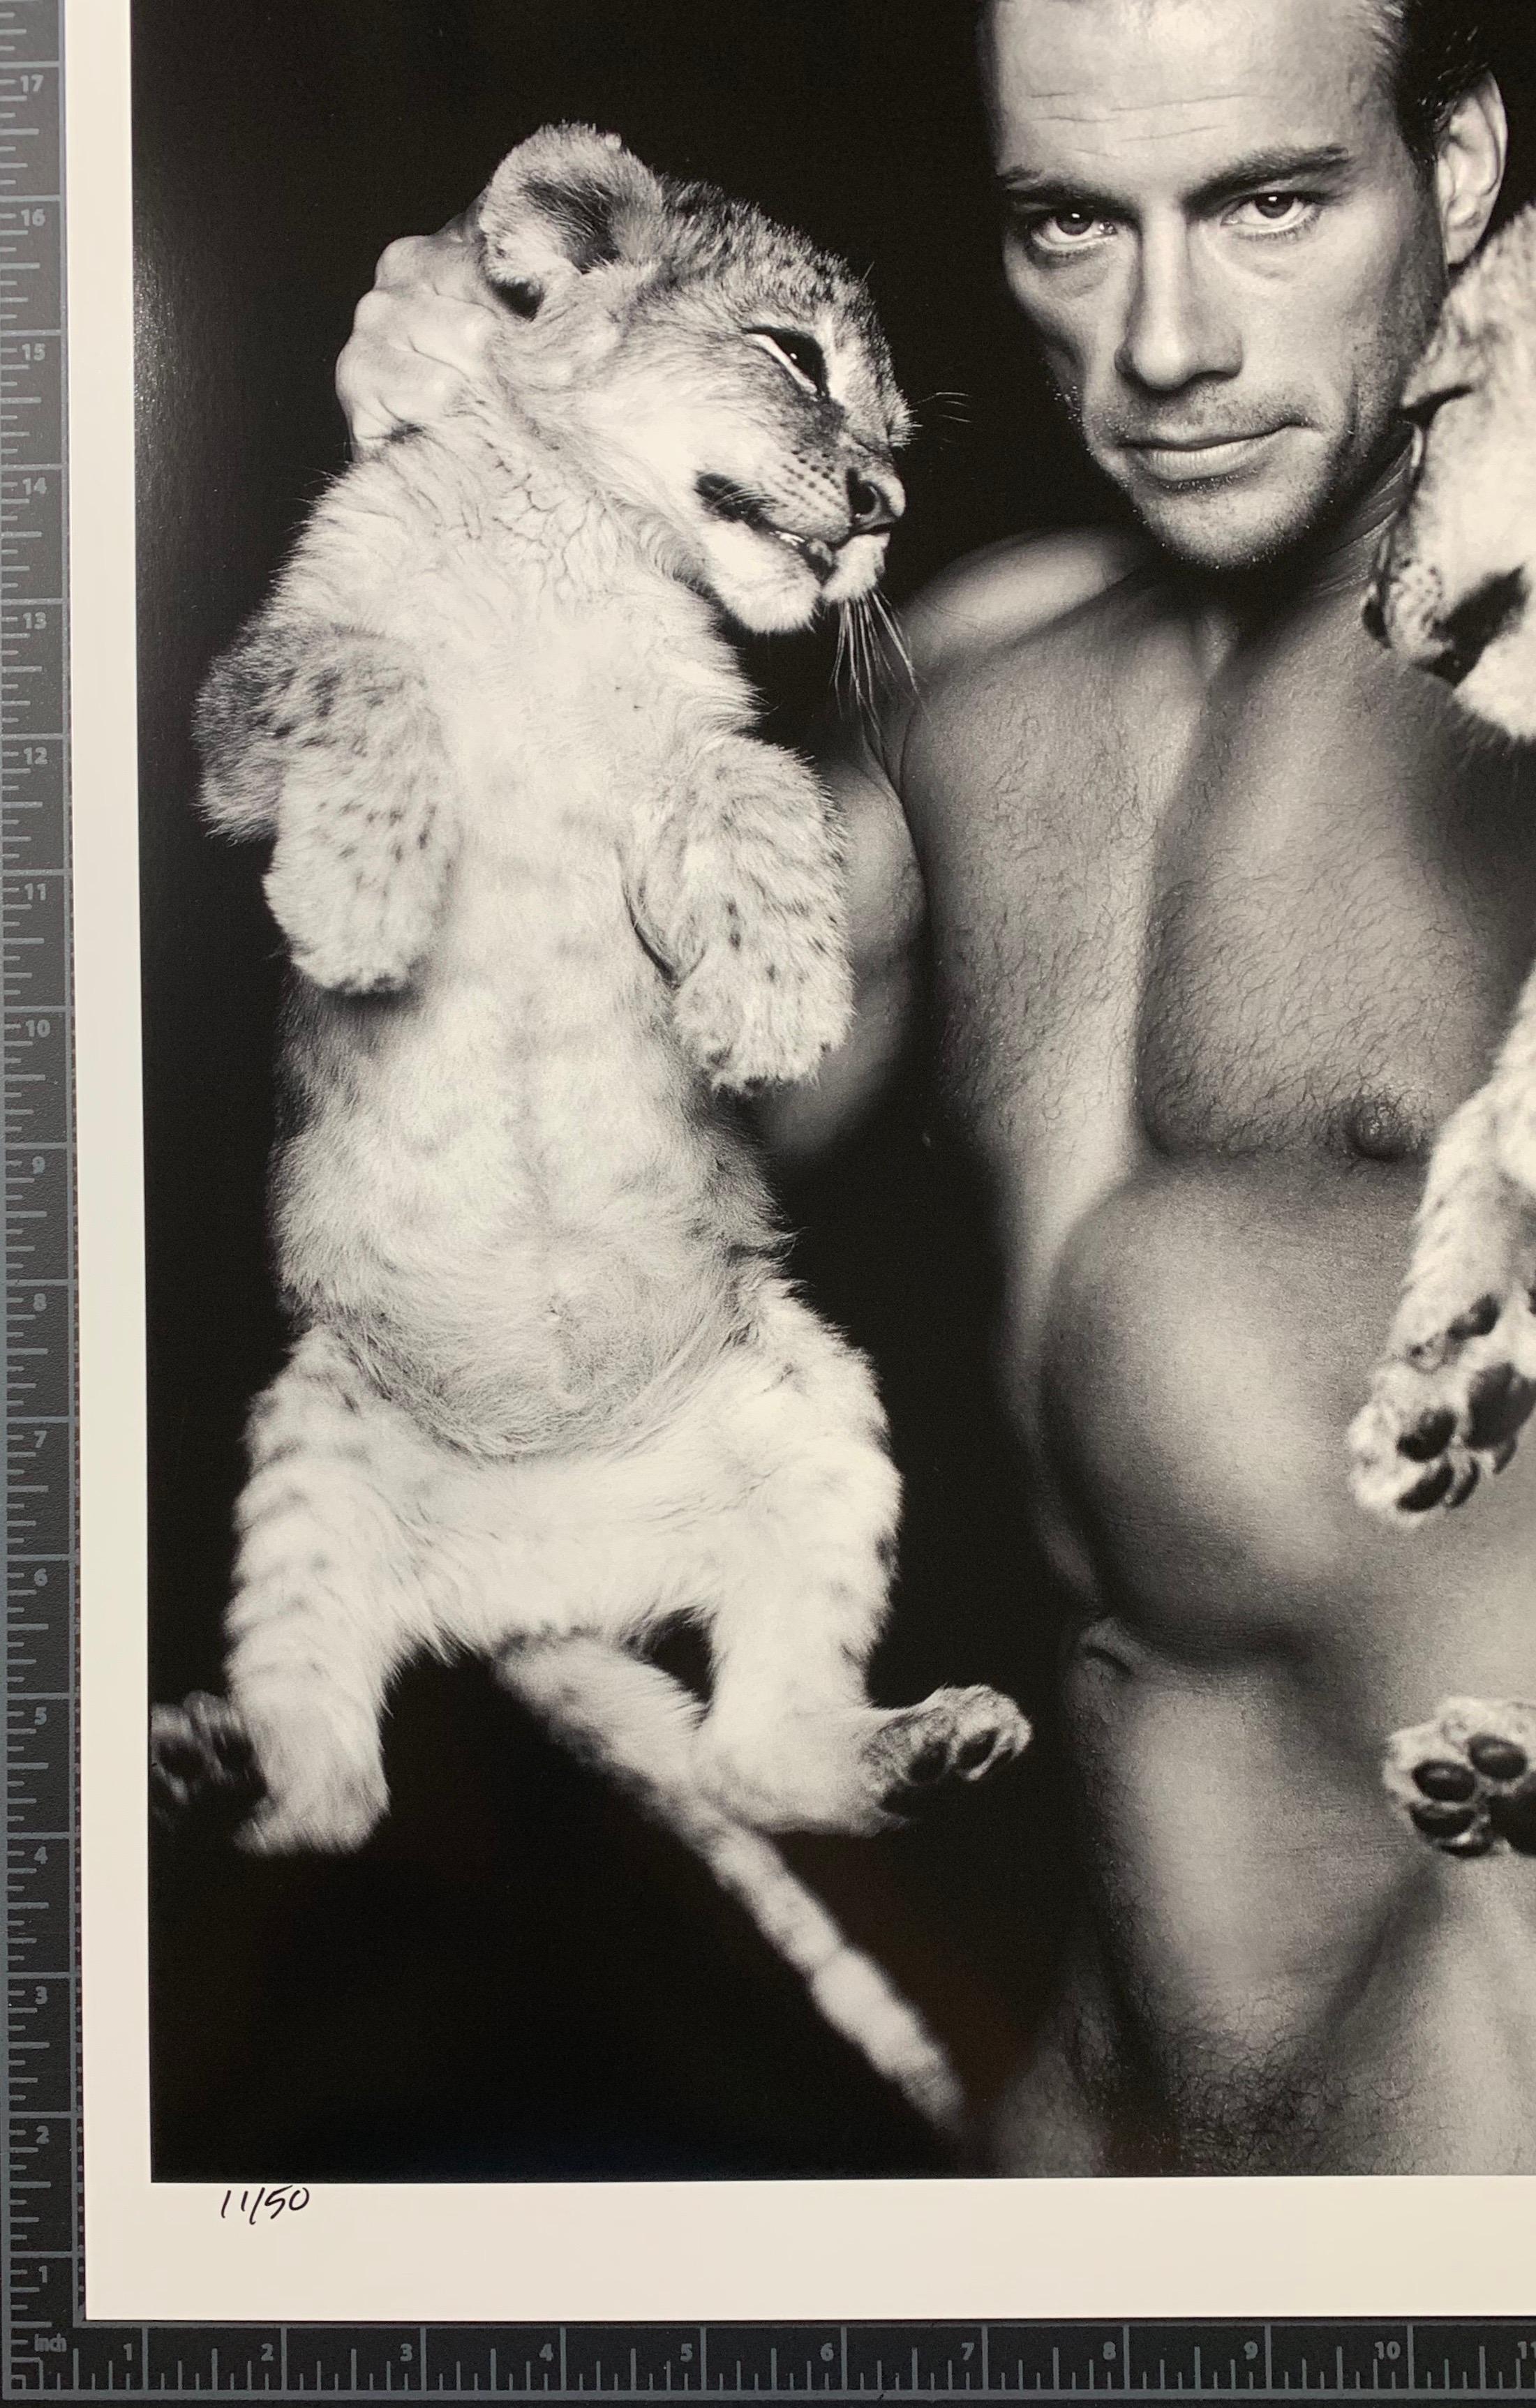 (Pictures of Actual Images) New release fine art photograph featuring Jean-Claude Van Damme holding two lion cubs during a photo shoot in 1998 in South Africa for his hit movie 